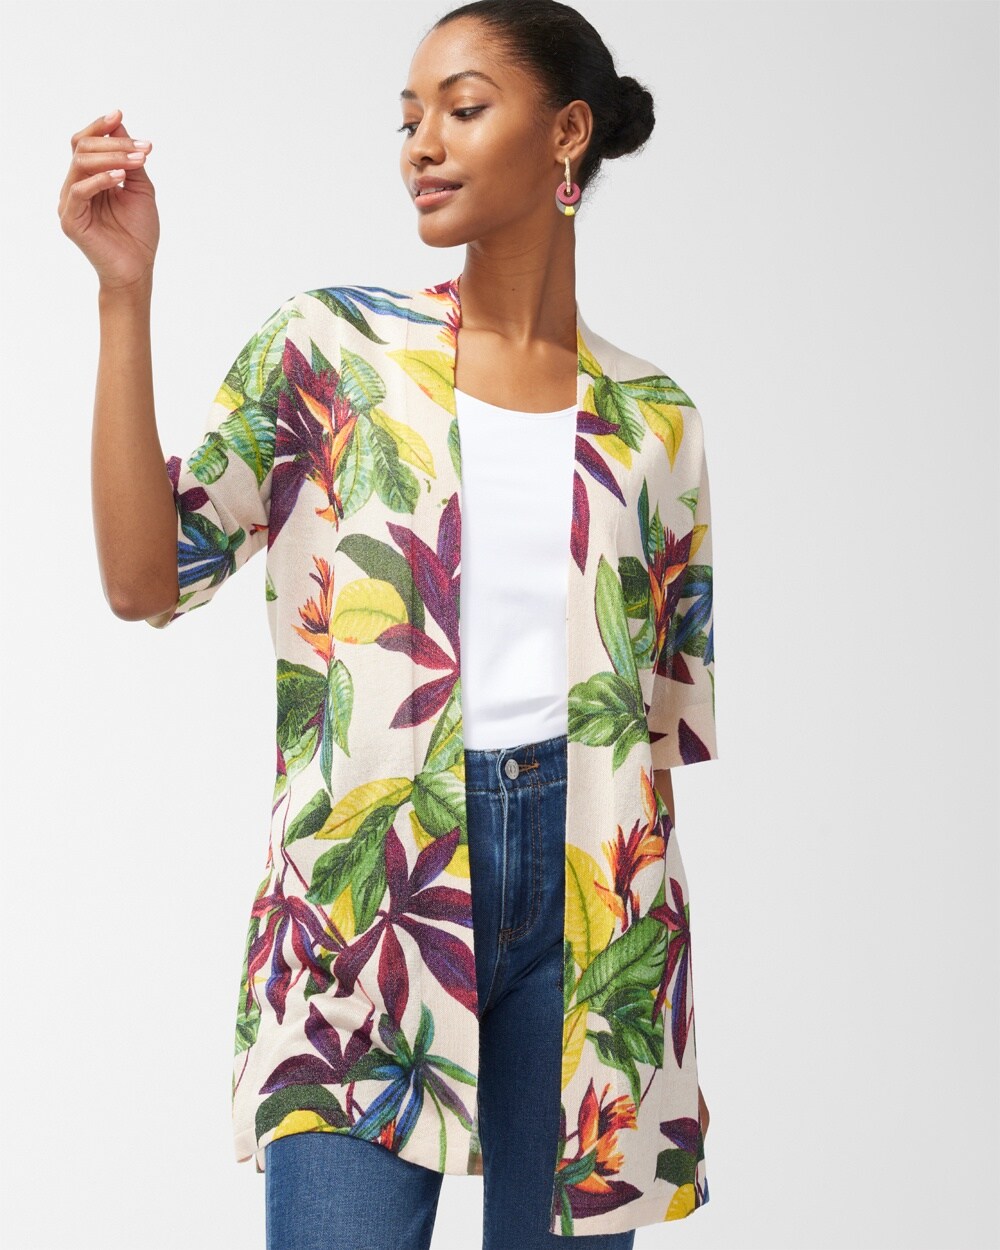 Summer Romance Floral Midi Cardigan video preview image, click to start video